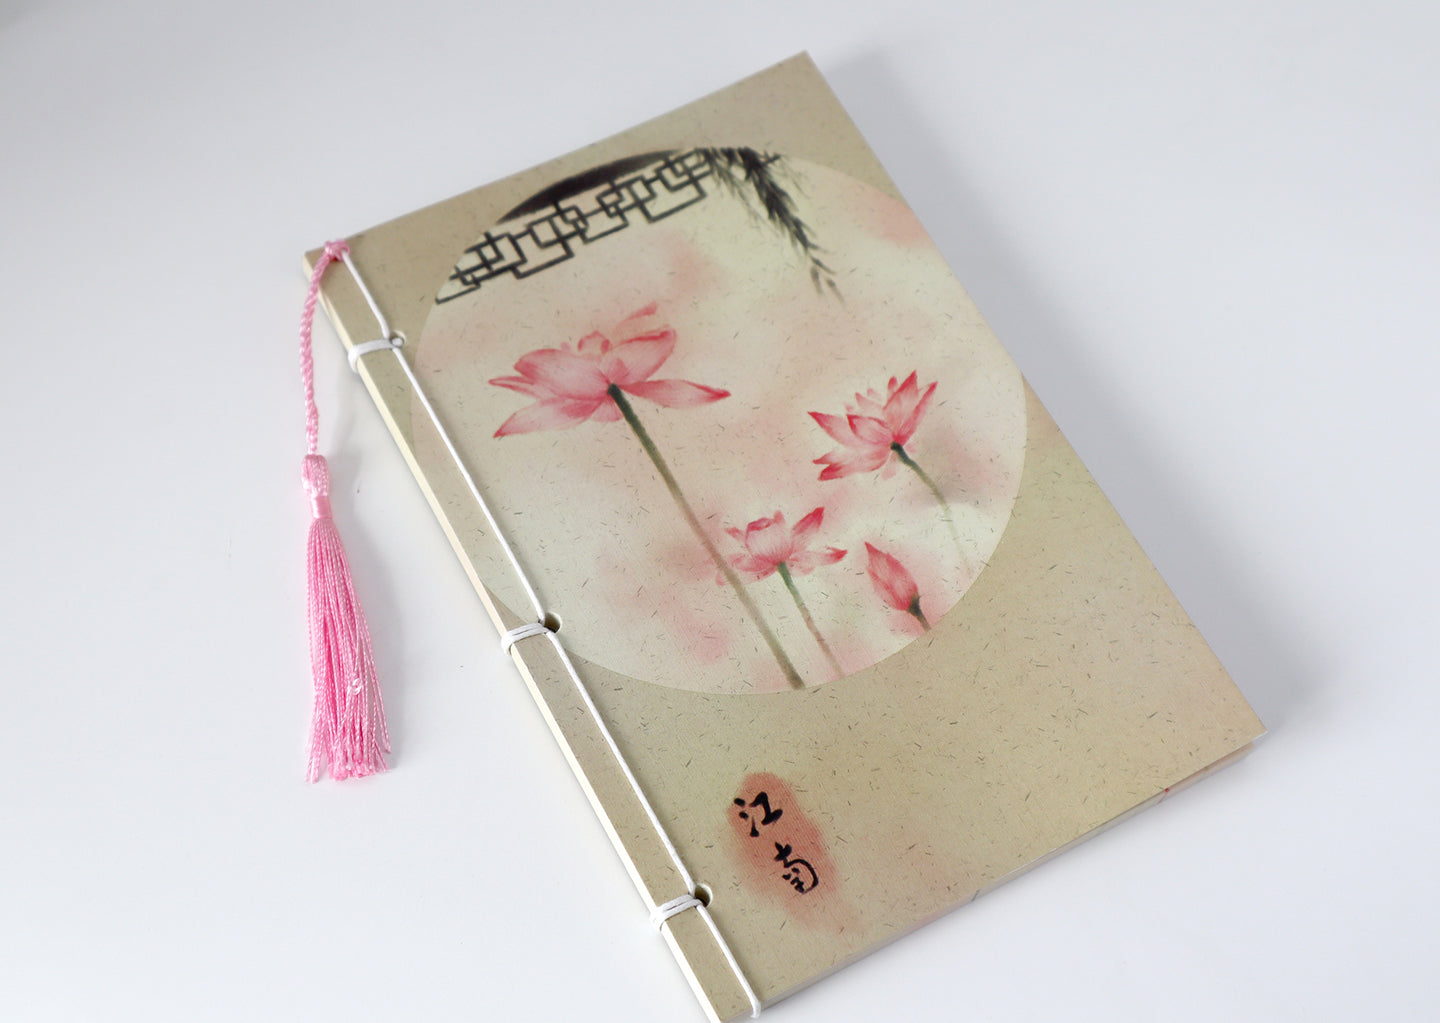 The Chinese Vintage Style Notebook